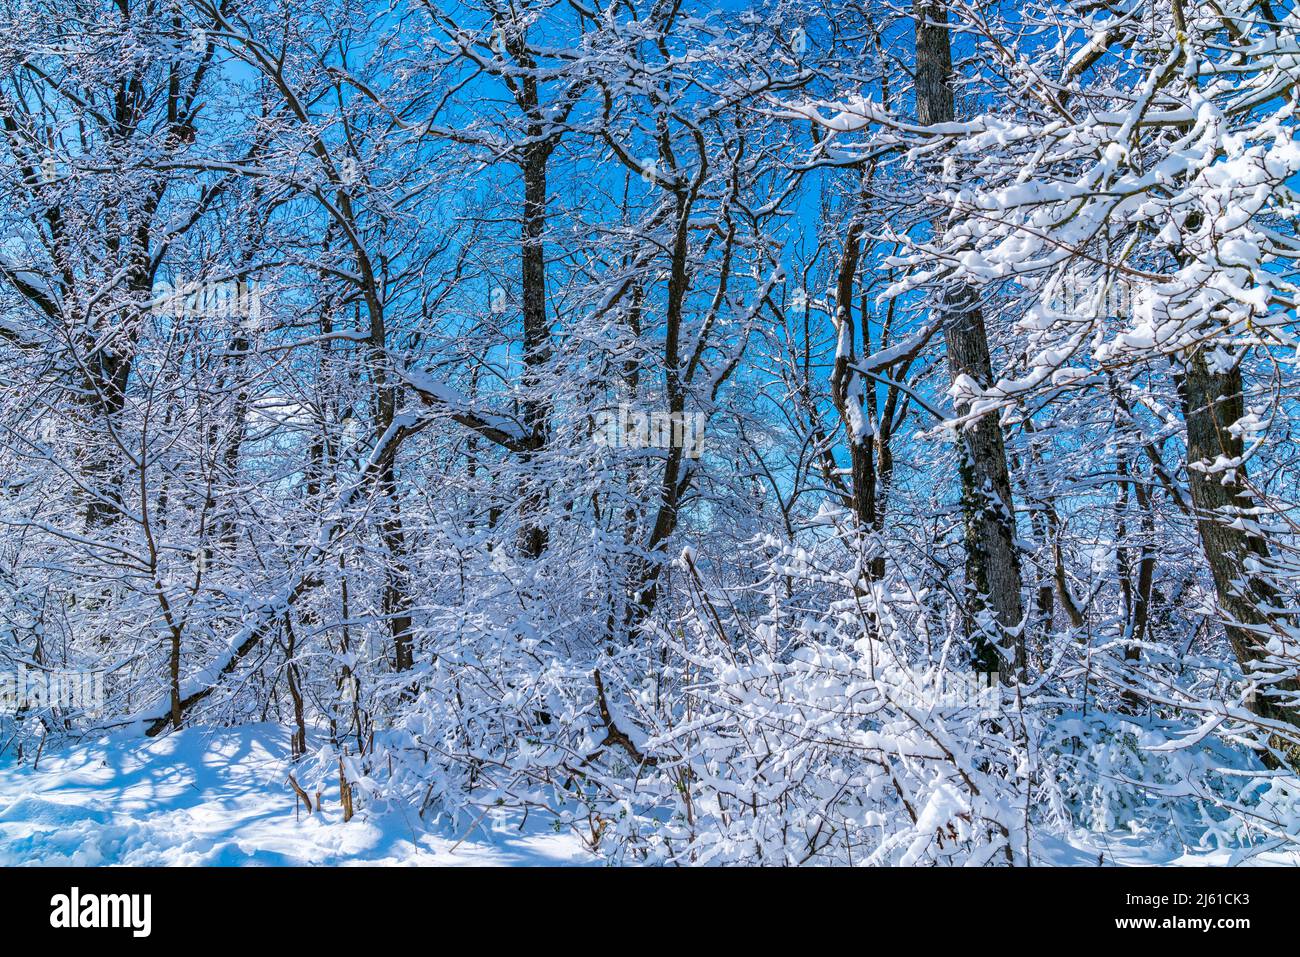 Germany, white snow covered branches of trees in a forest in winter wonderland landscape scene with blue sky and sun behind Stock Photo